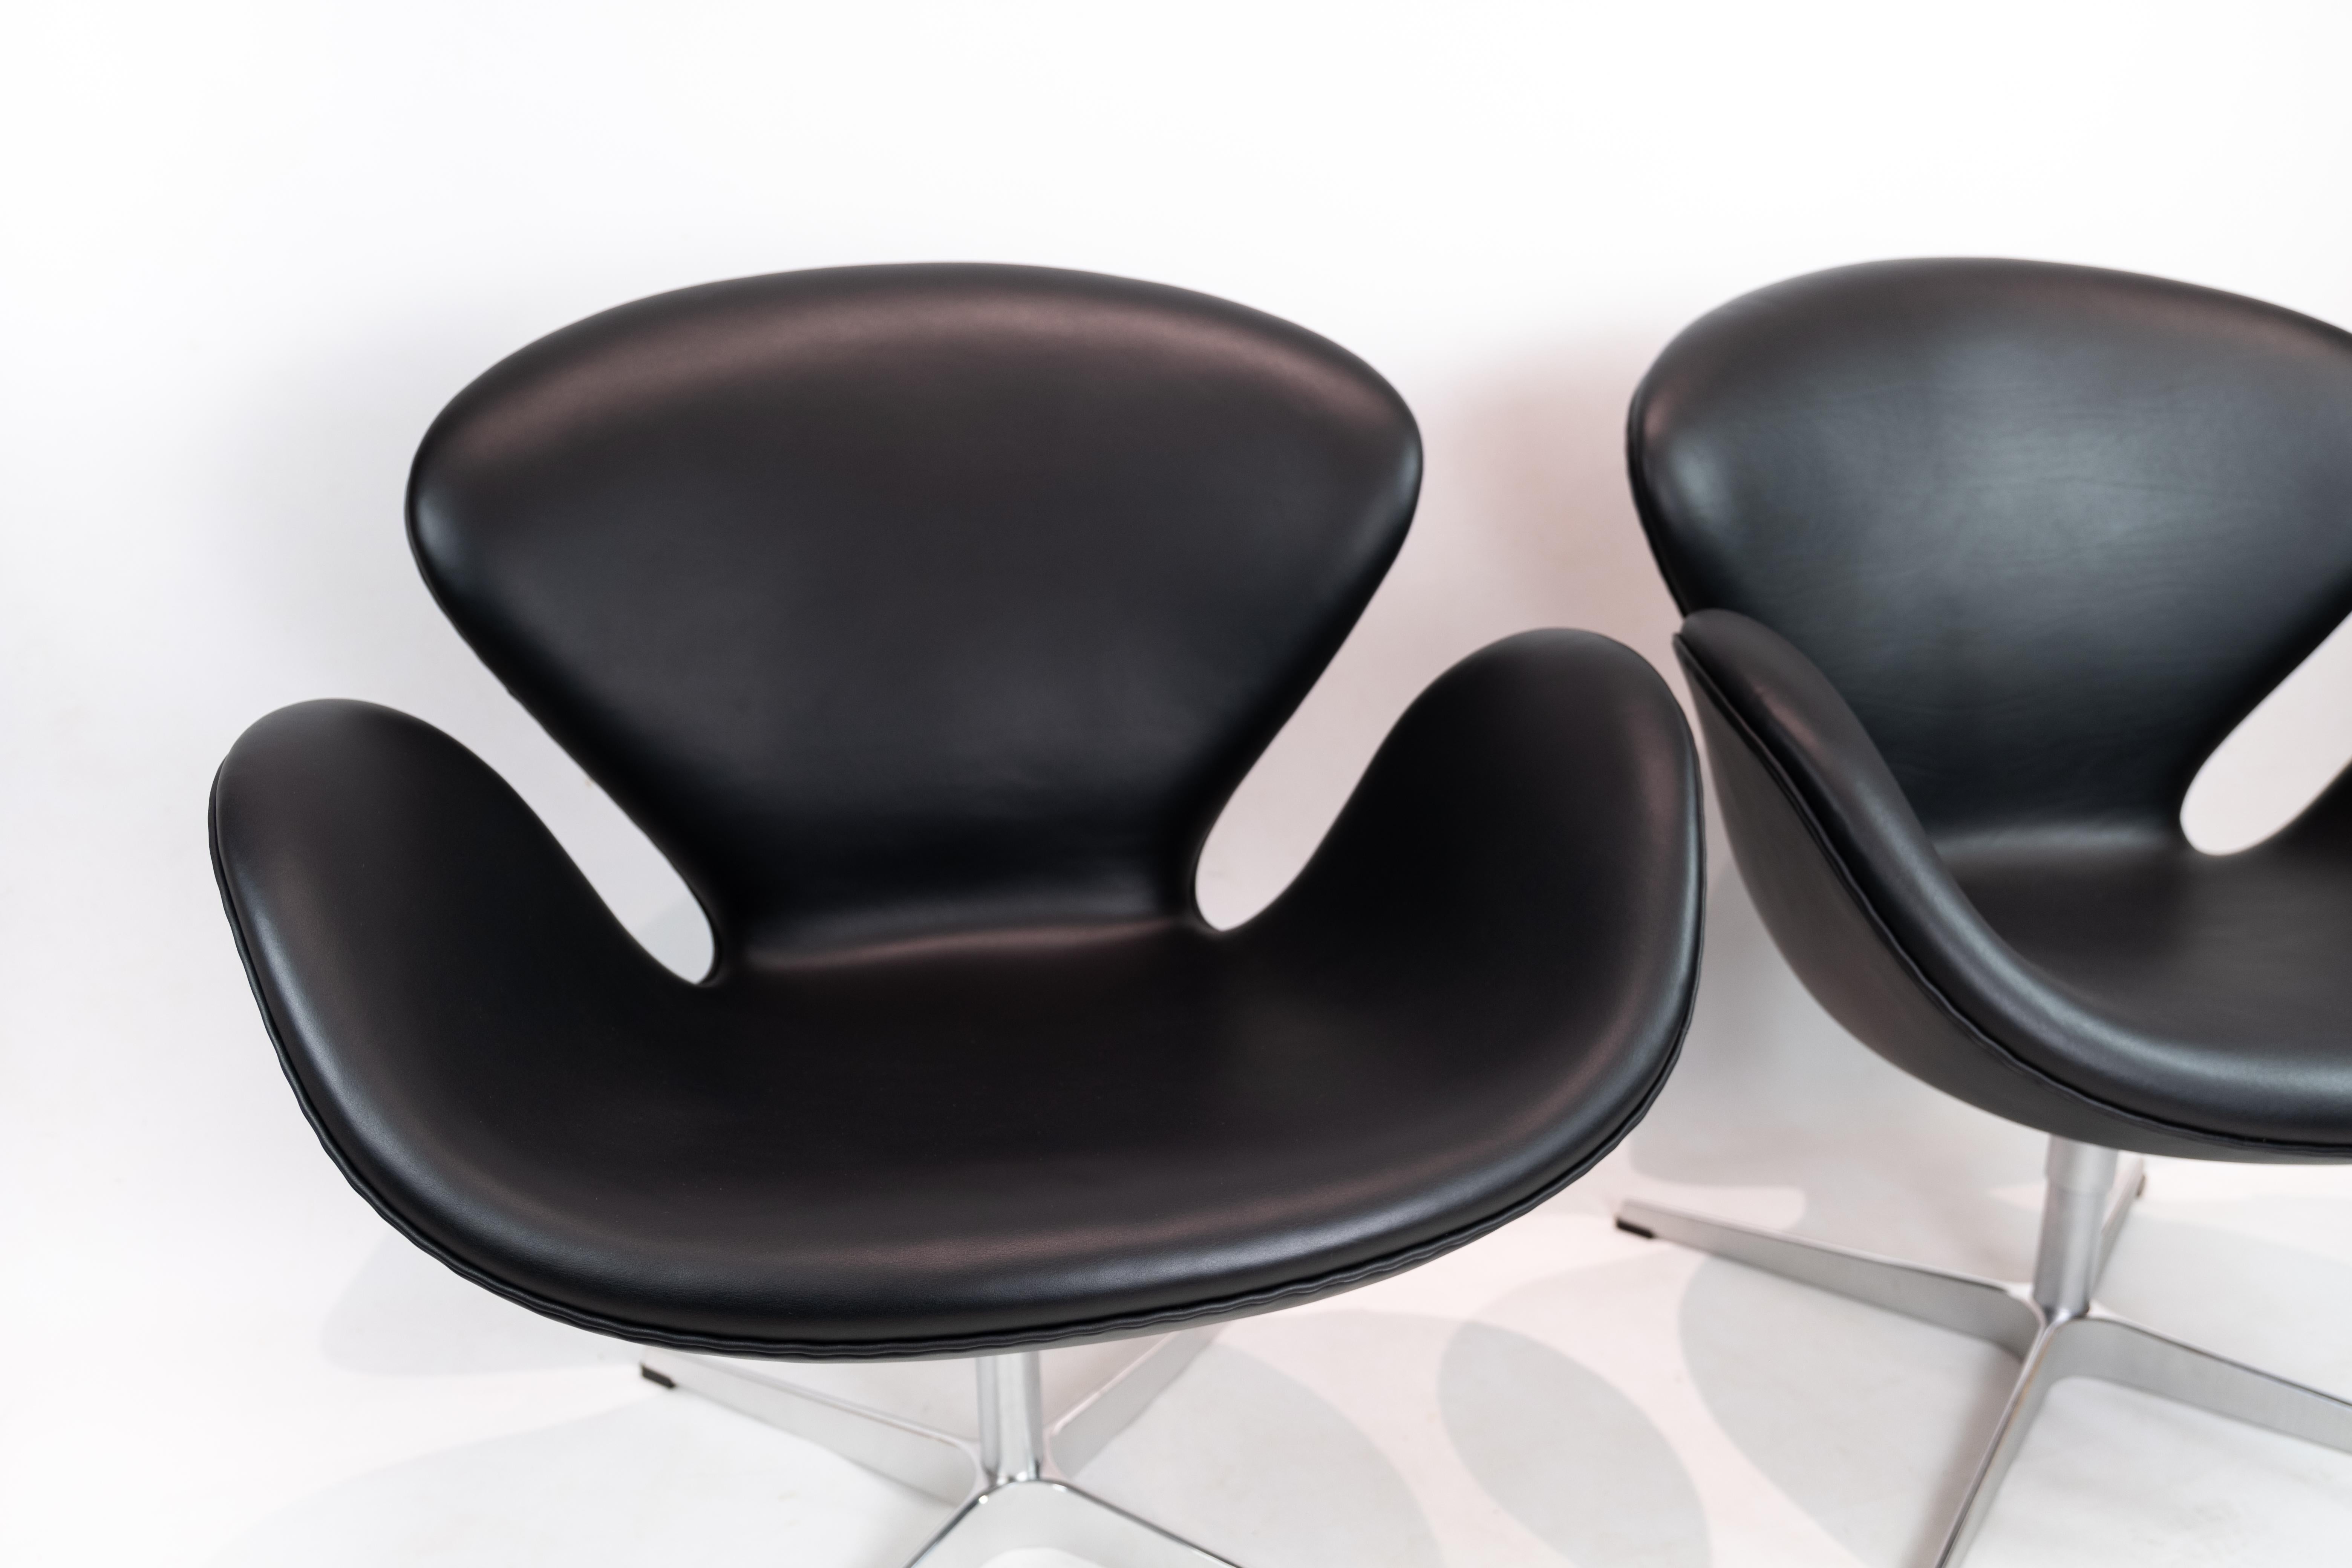 A pair of swan chairs, model 3320, designed by Arne Jacobsen in 1958 and manufactured by Fritz Hansen. The chairs are with original upholstery in black leather.

This product will be inspected thoroughly at our professional workshop by our educated